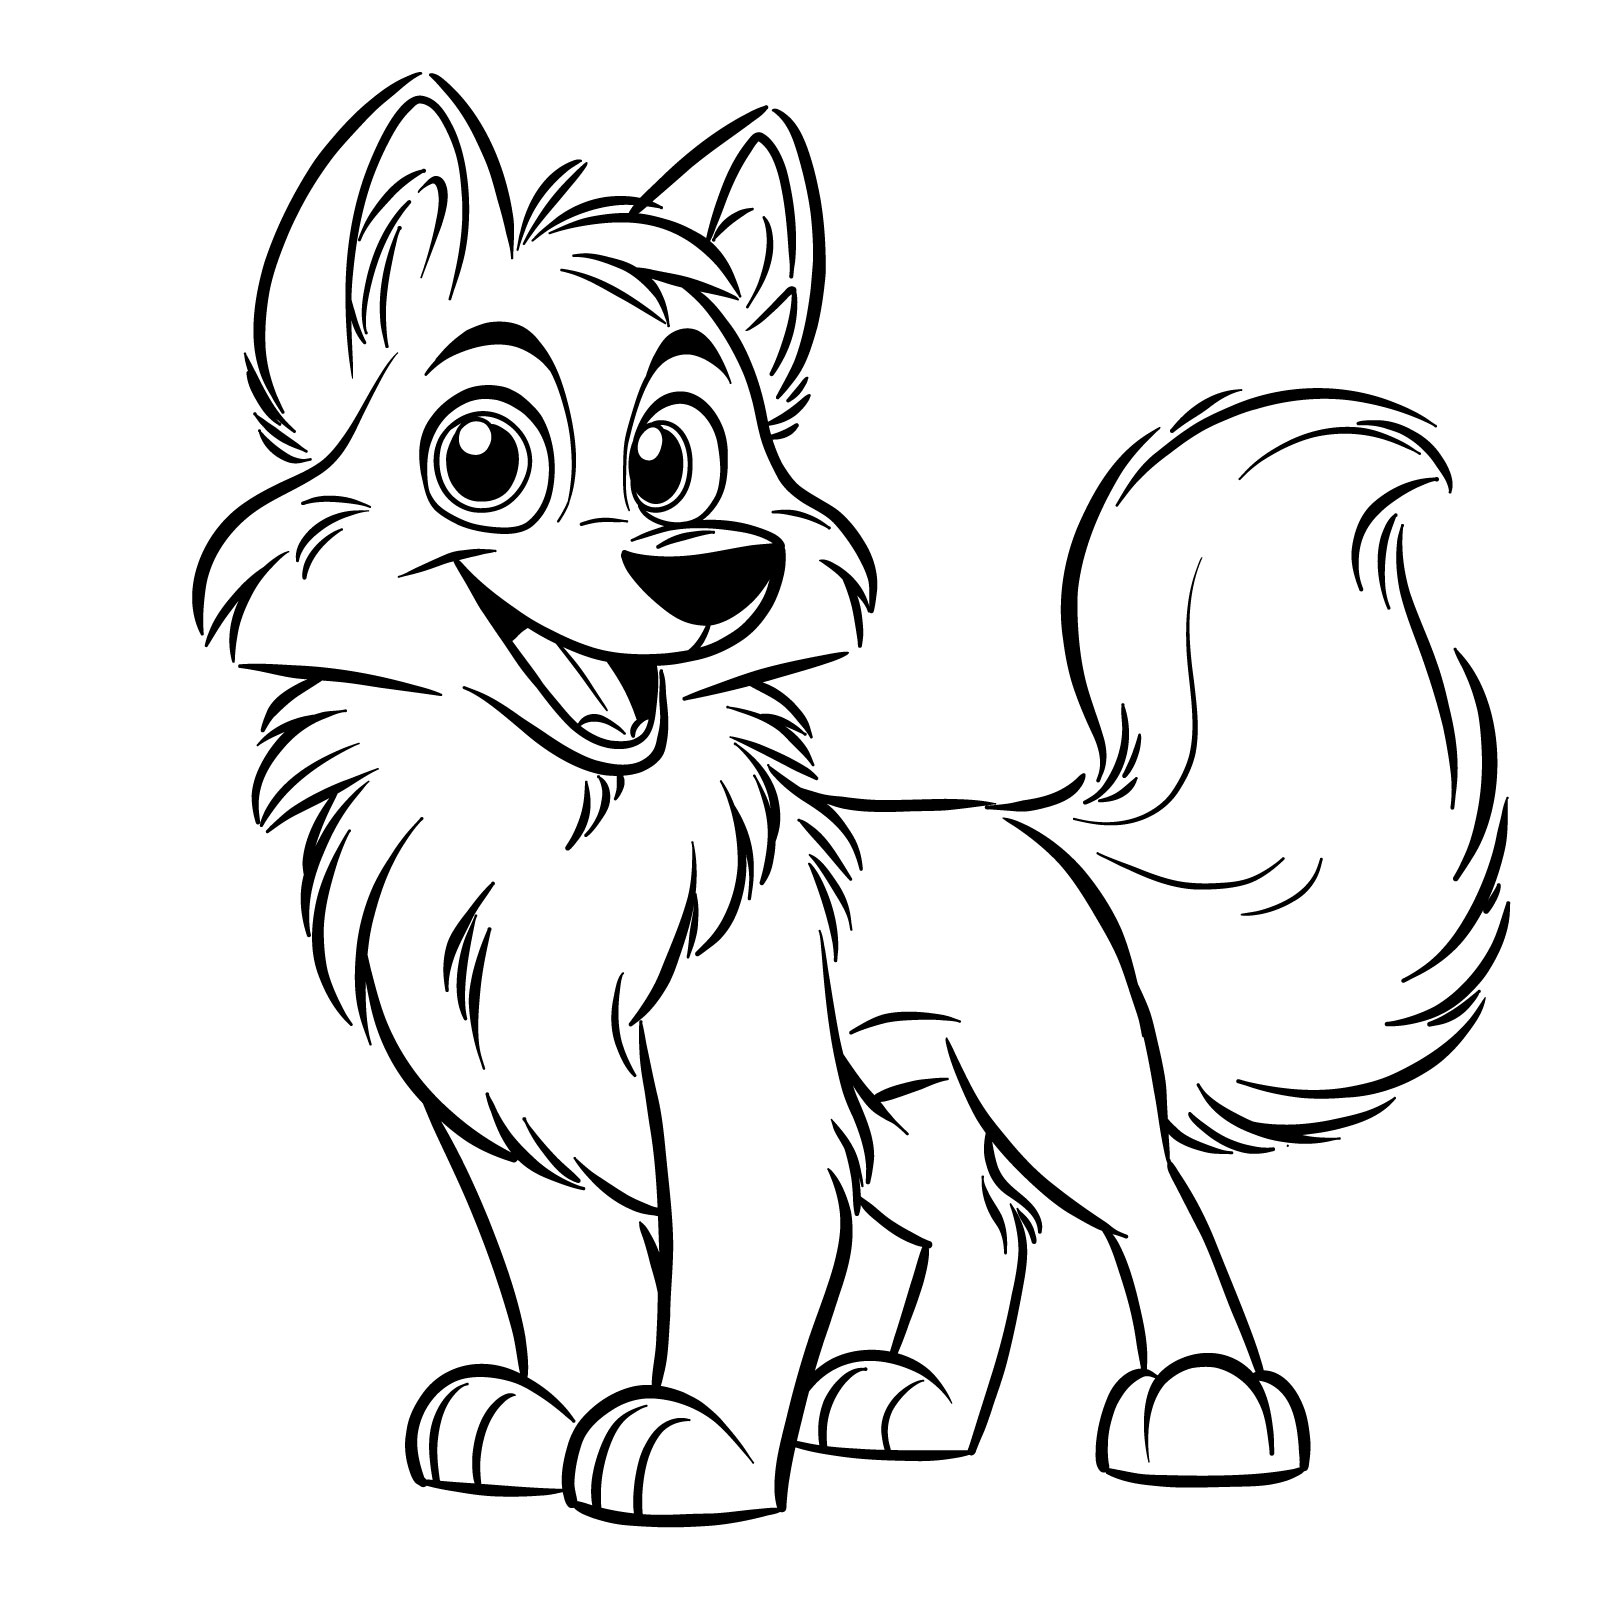 Completed cartoon wolf drawing with full body and details - step 16